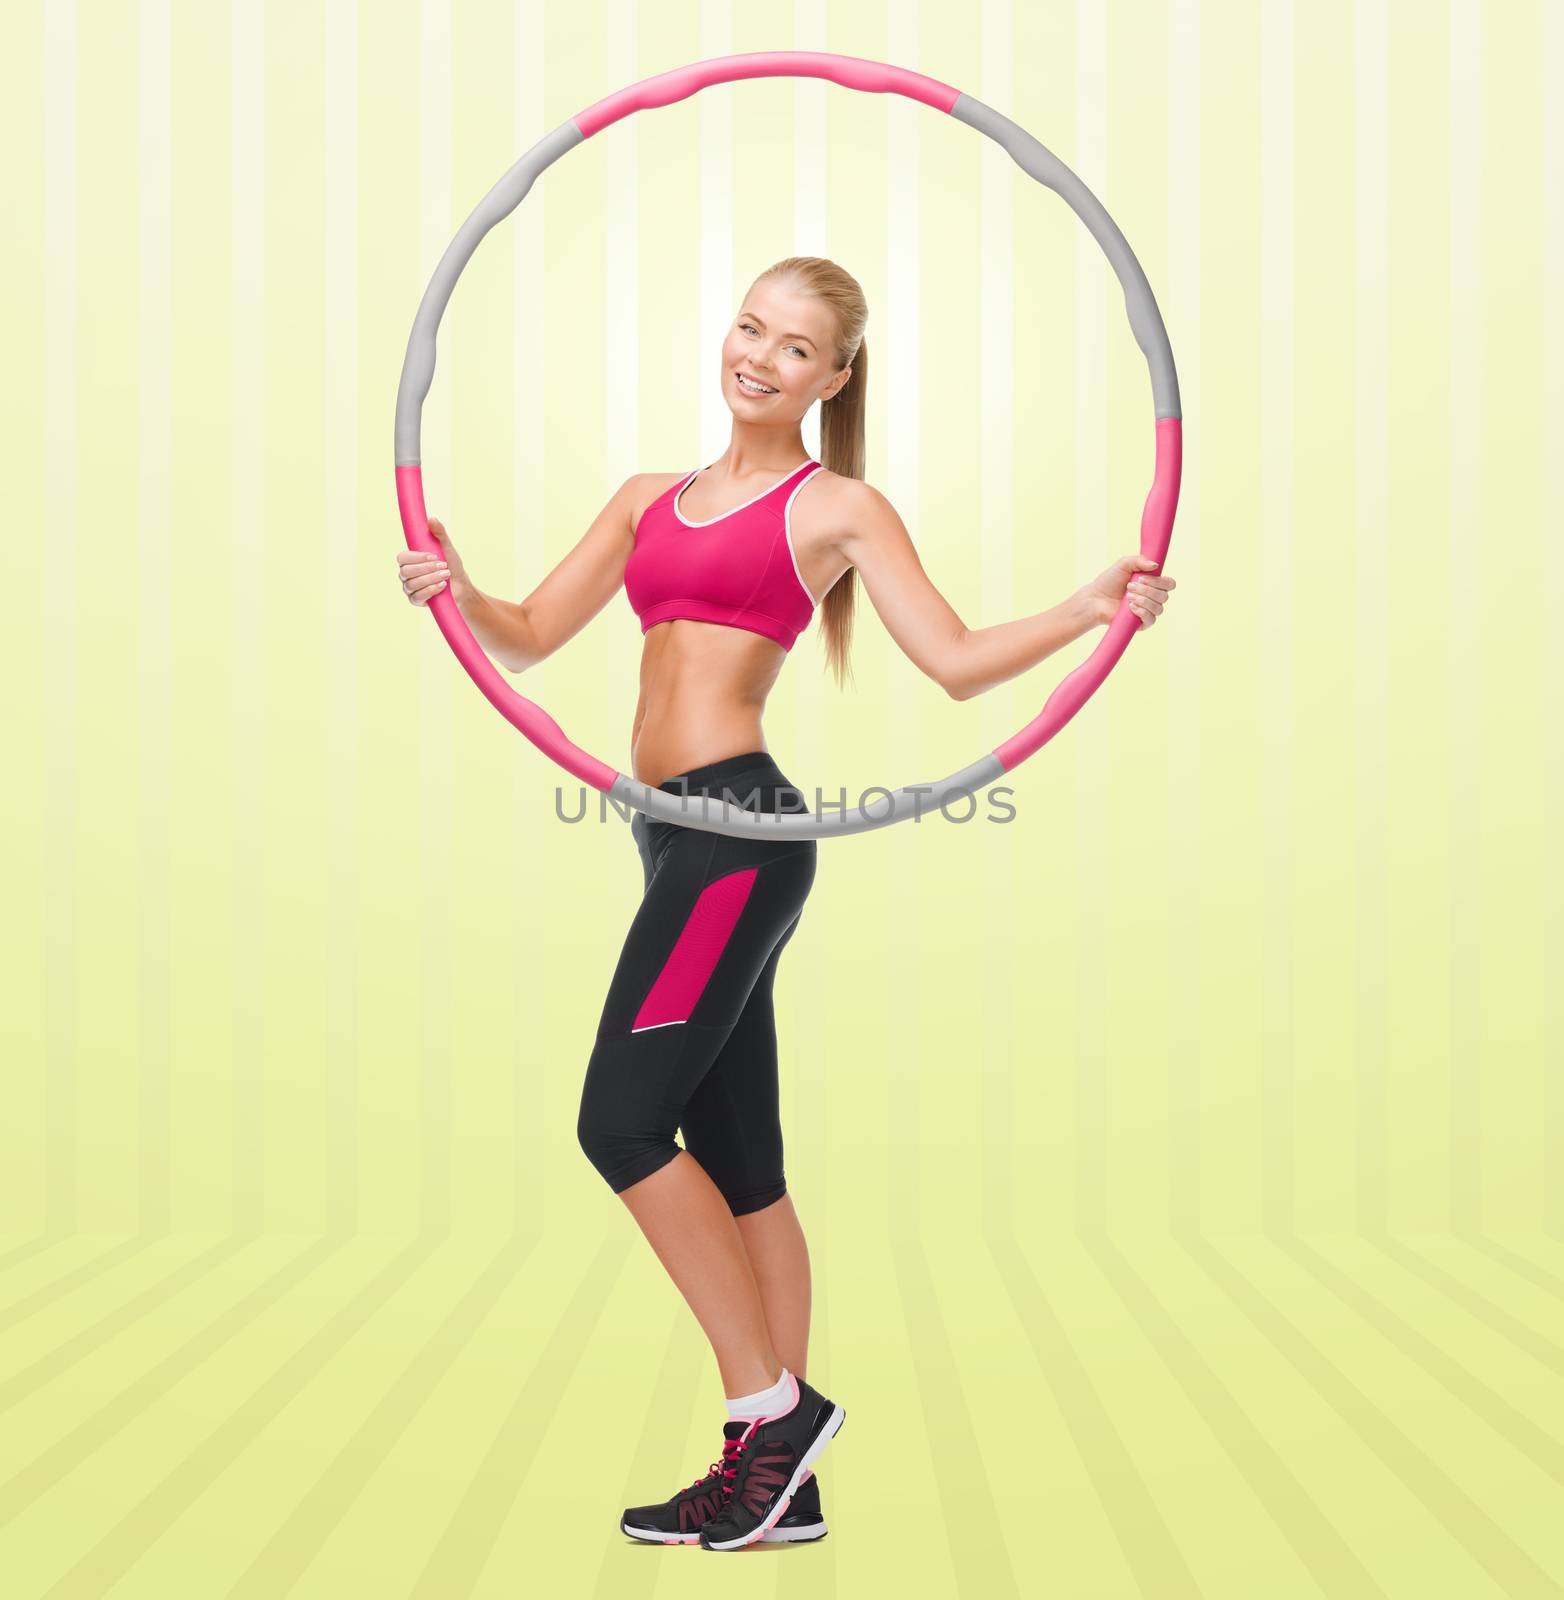 fitness, sport, people and healthcare concept - young sporty woman exercising with hula hoop over yellow striped background